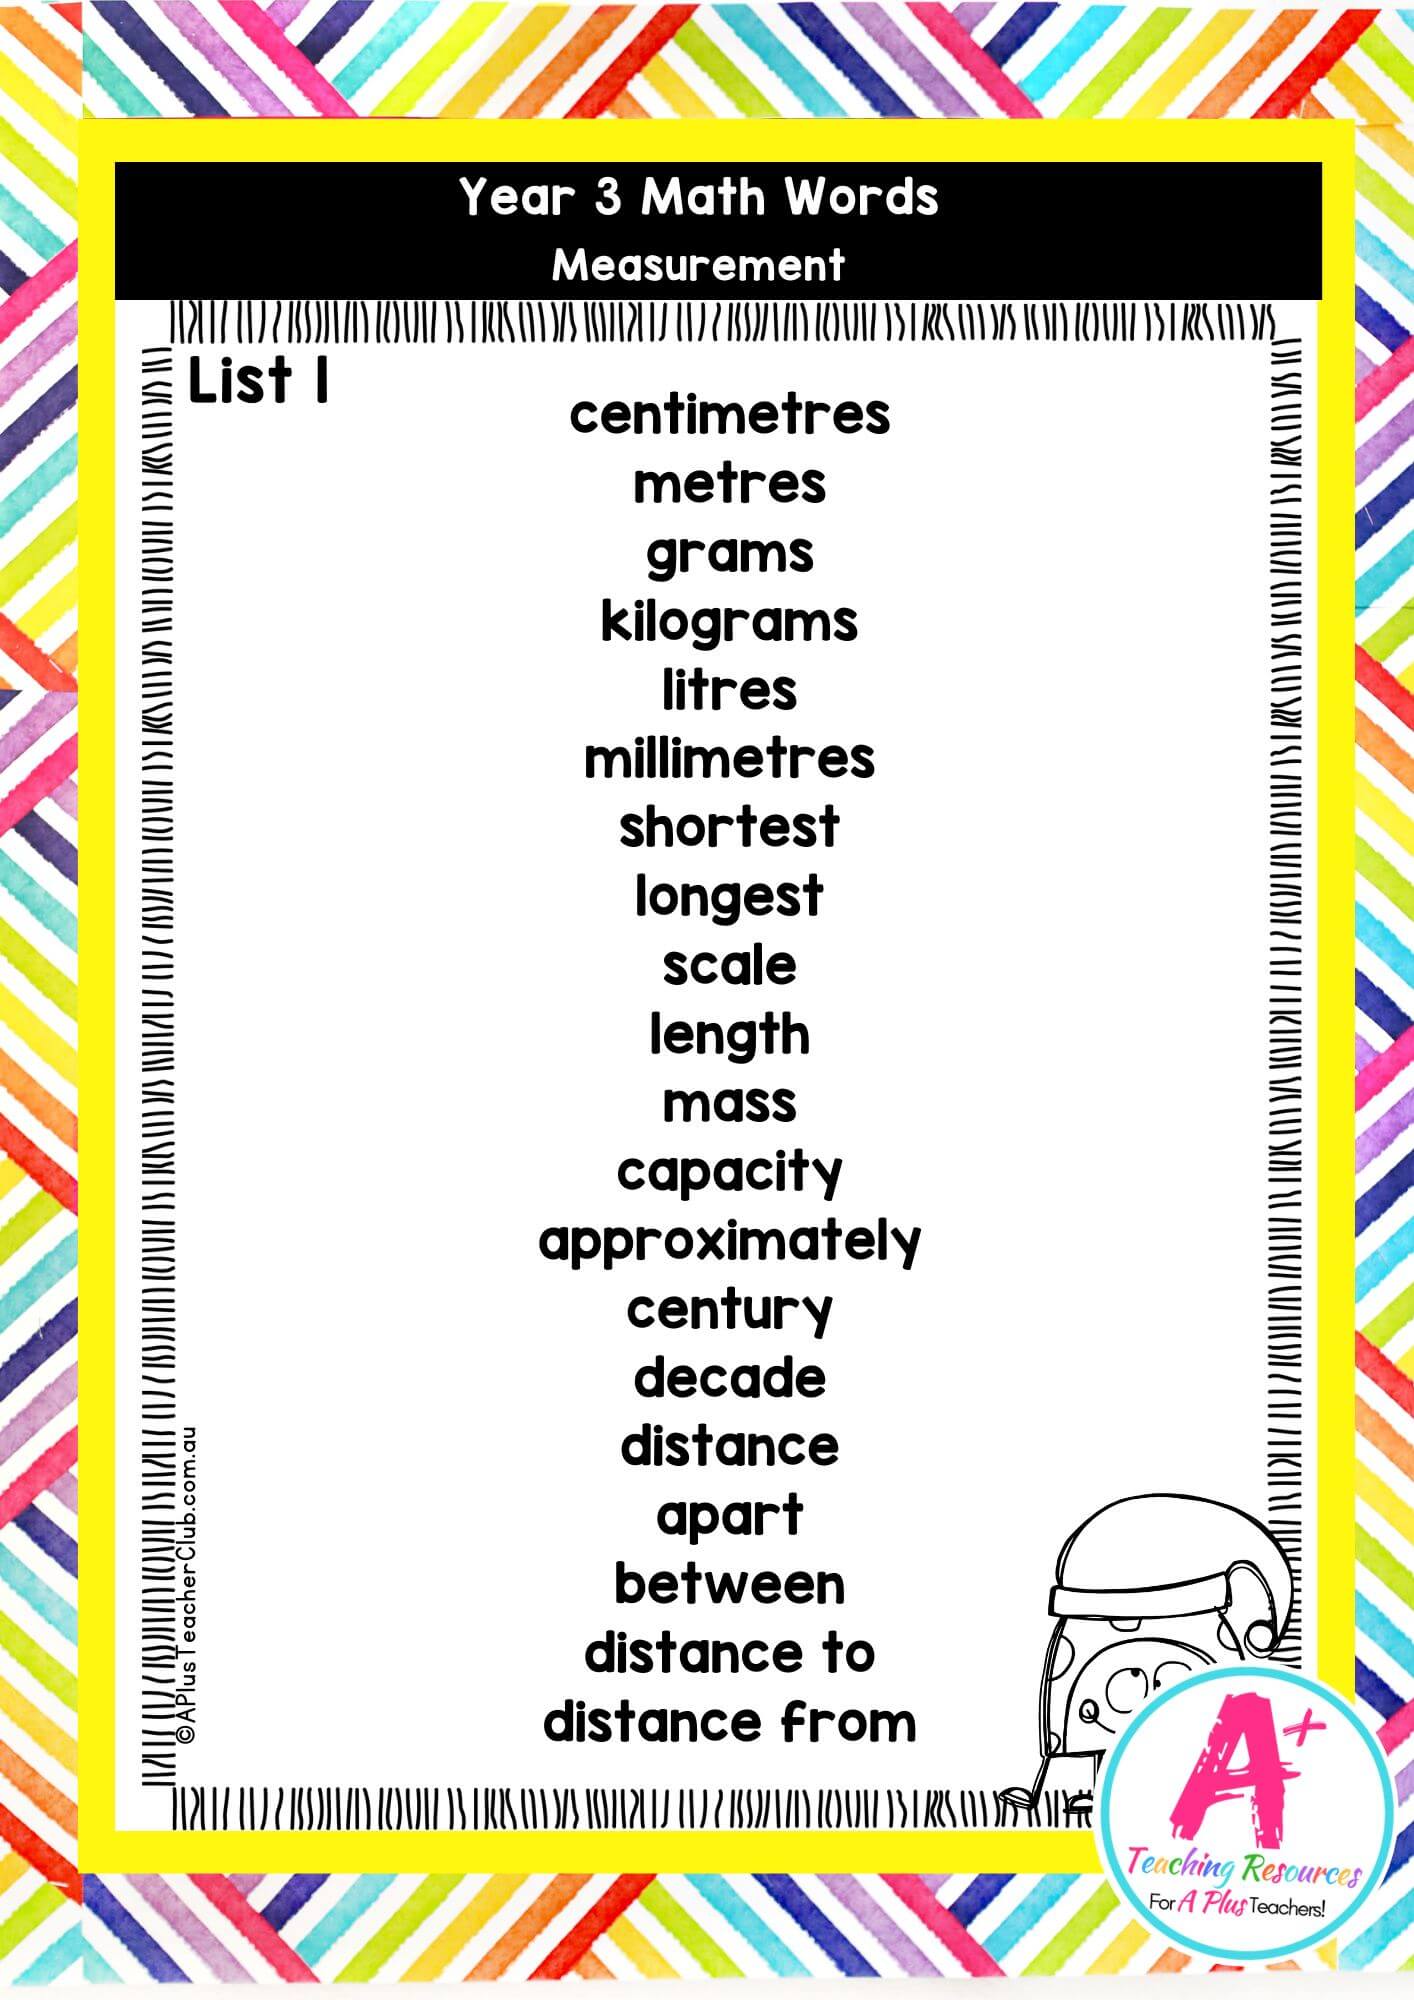 Year 3 Math Vocab Posters Measurement & Geometry